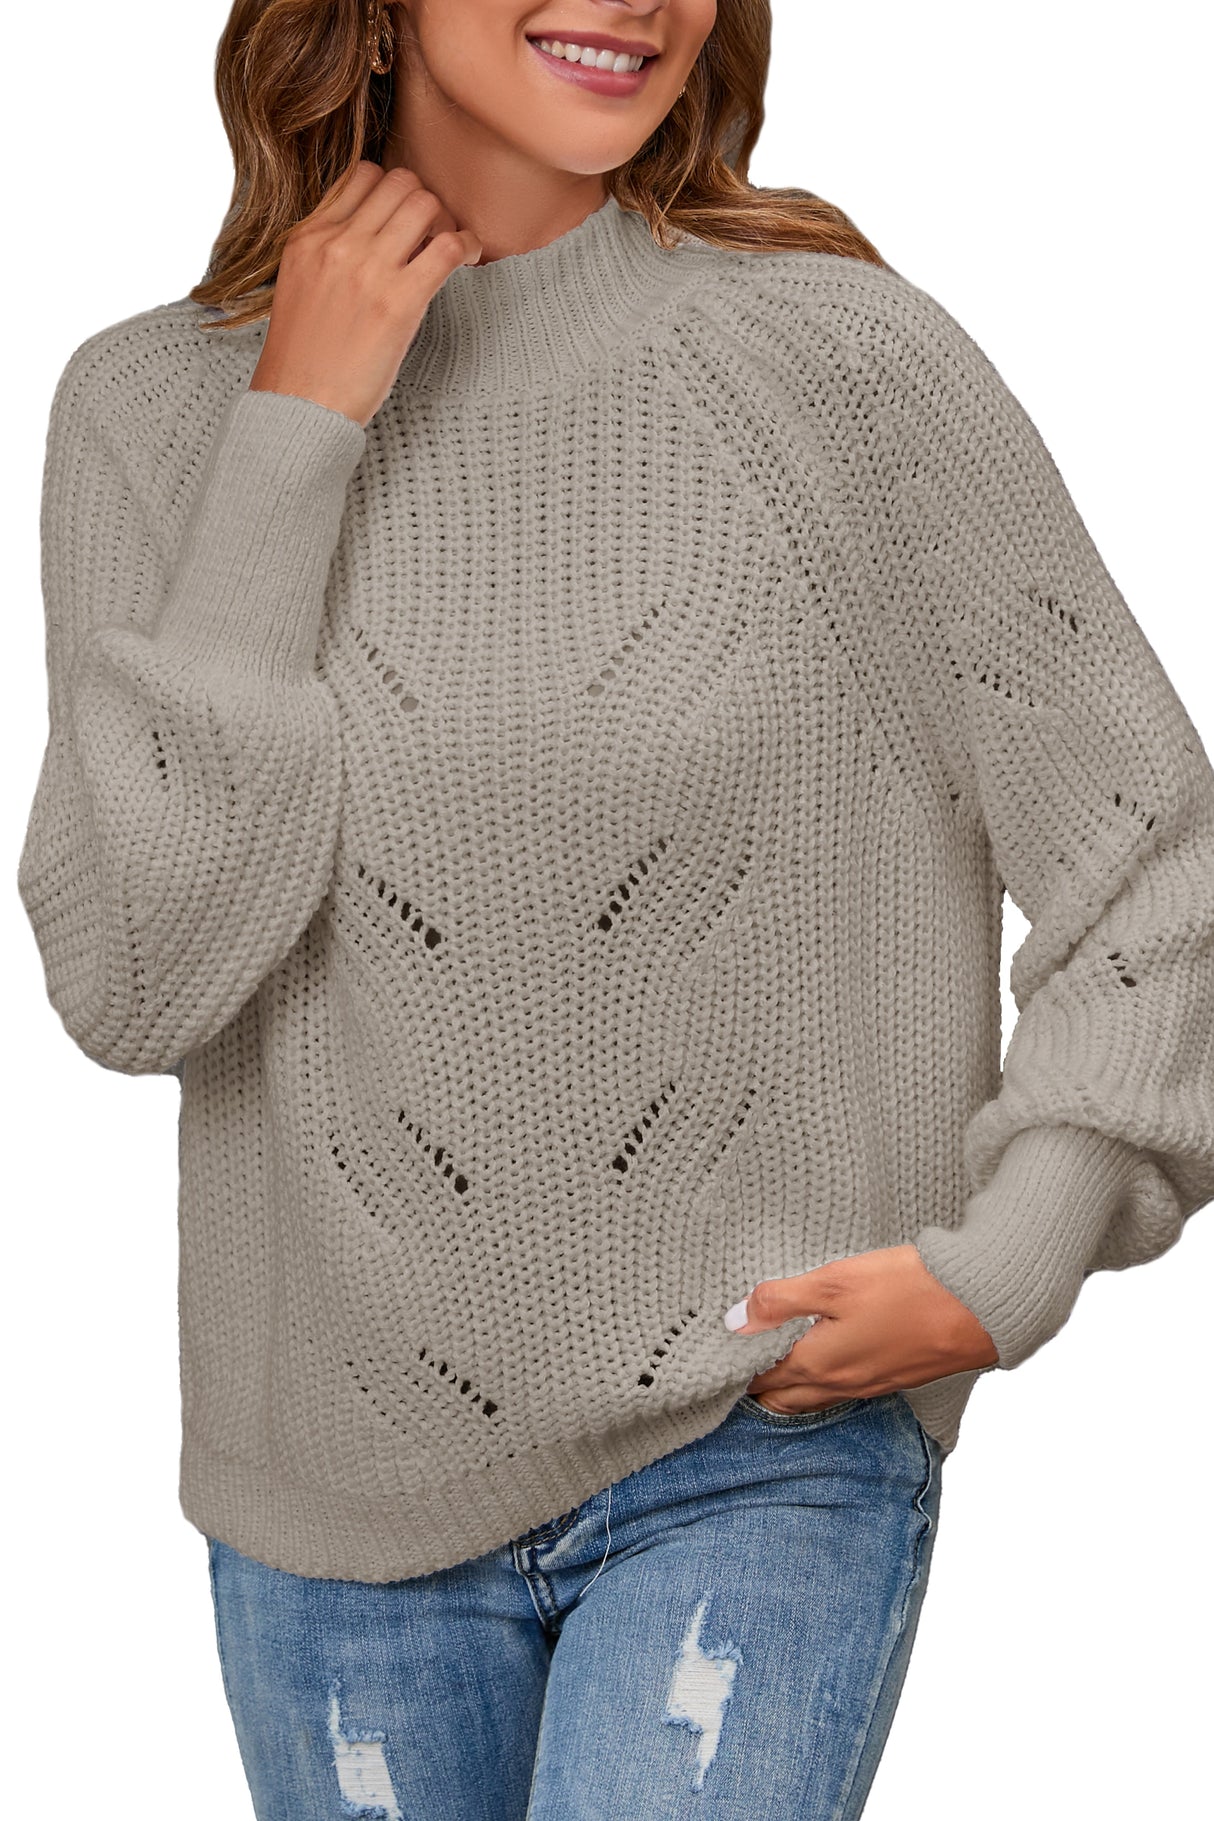 Women's Cotton Mock Neck Pullover Cropped Ribbed Knit Sweater Gray - GexWorldwide